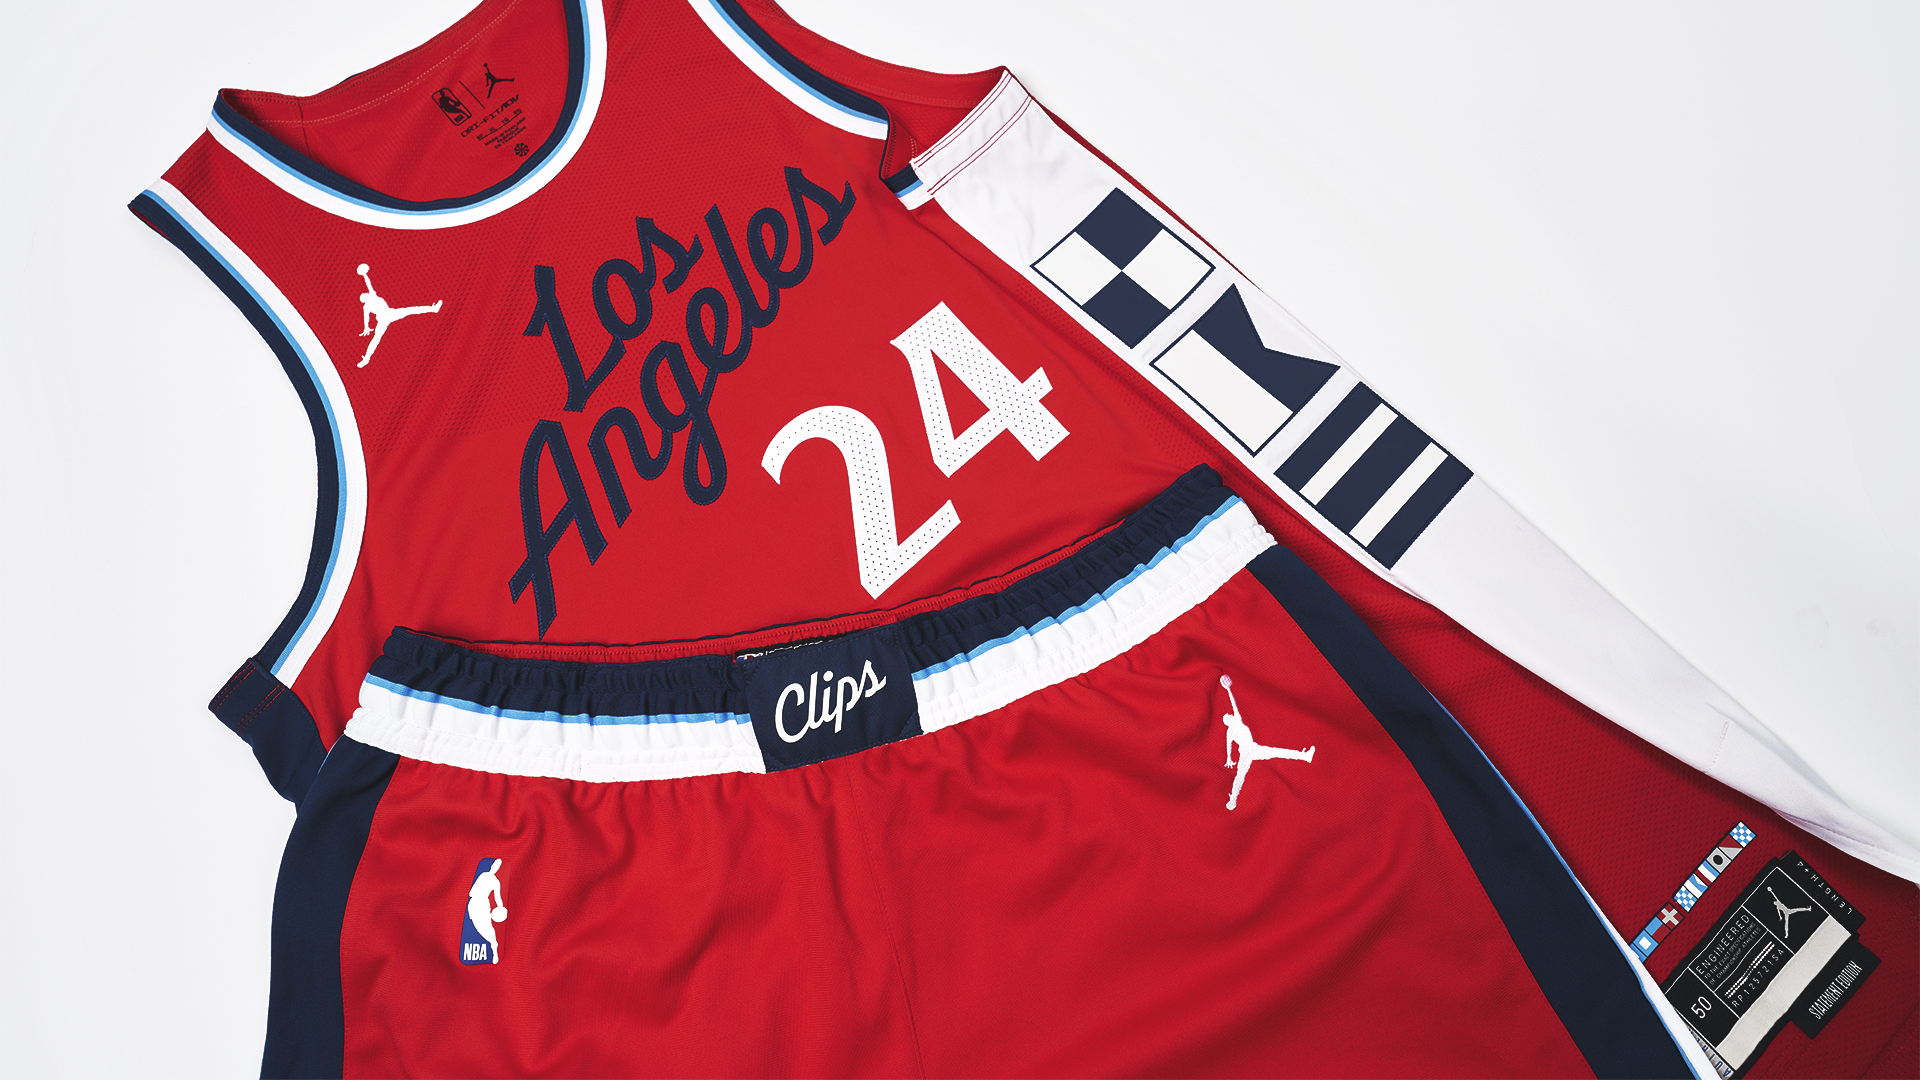 What Is a Clipper? Behind the Scenes of an NBA Rebrand